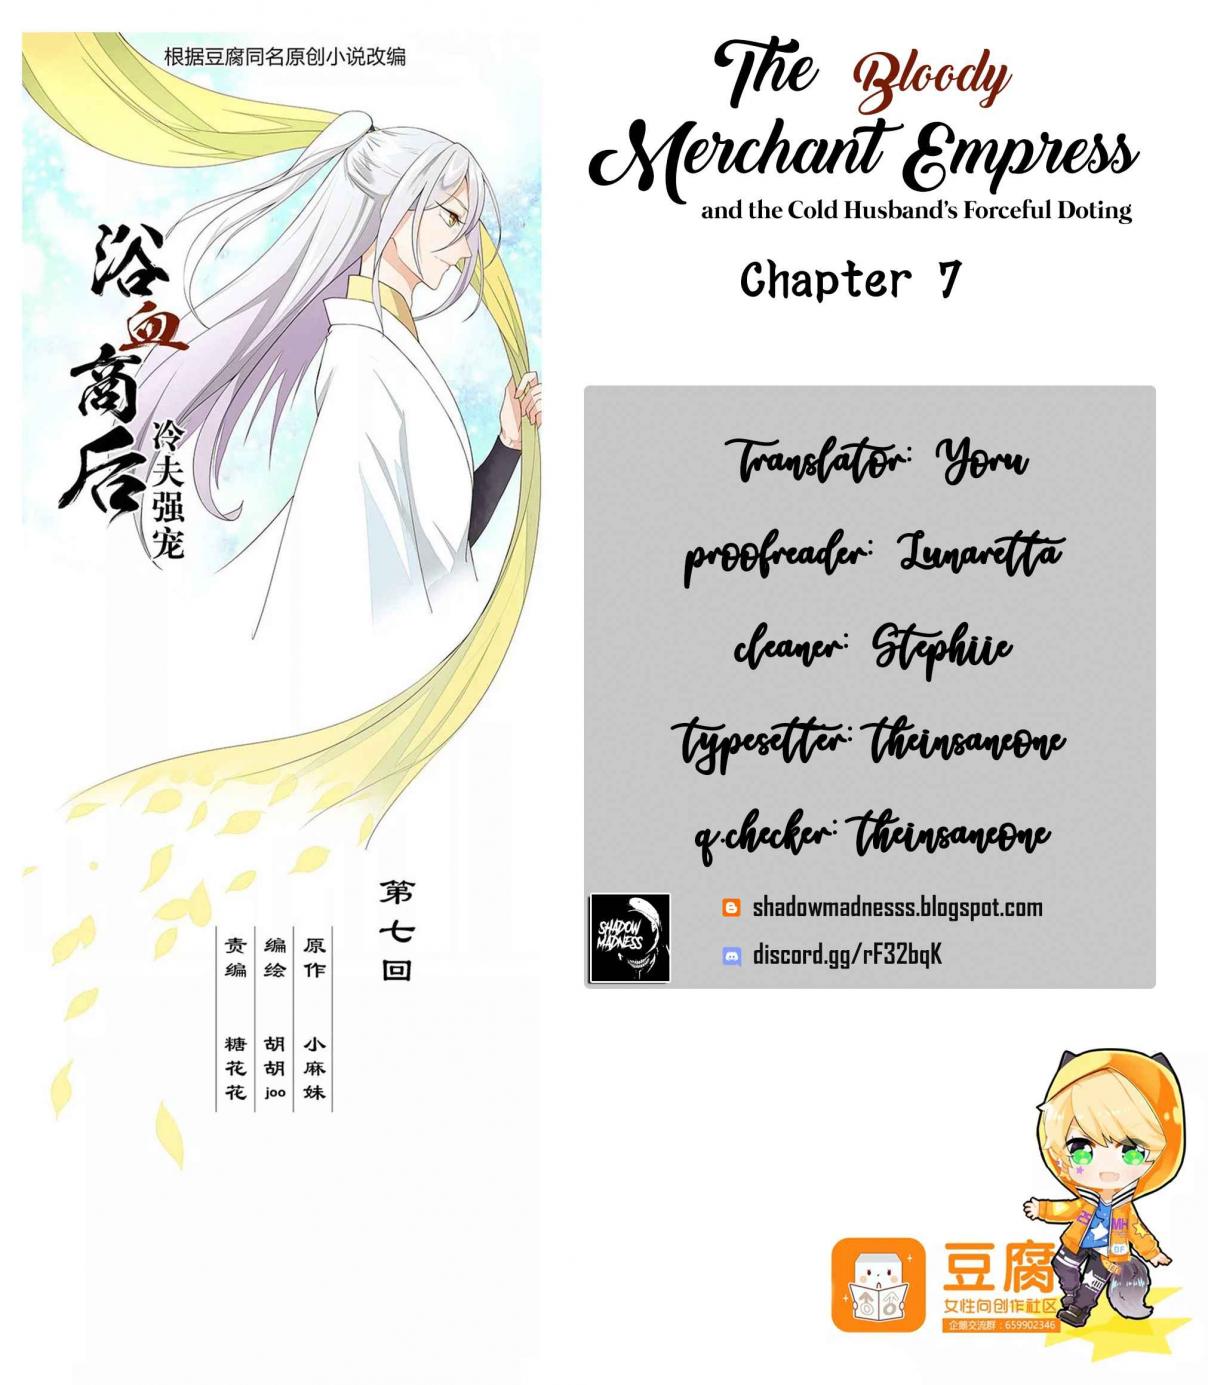 The Bloody Merchant Empress and the Cold Husband's Forceful Doting Ch. 7